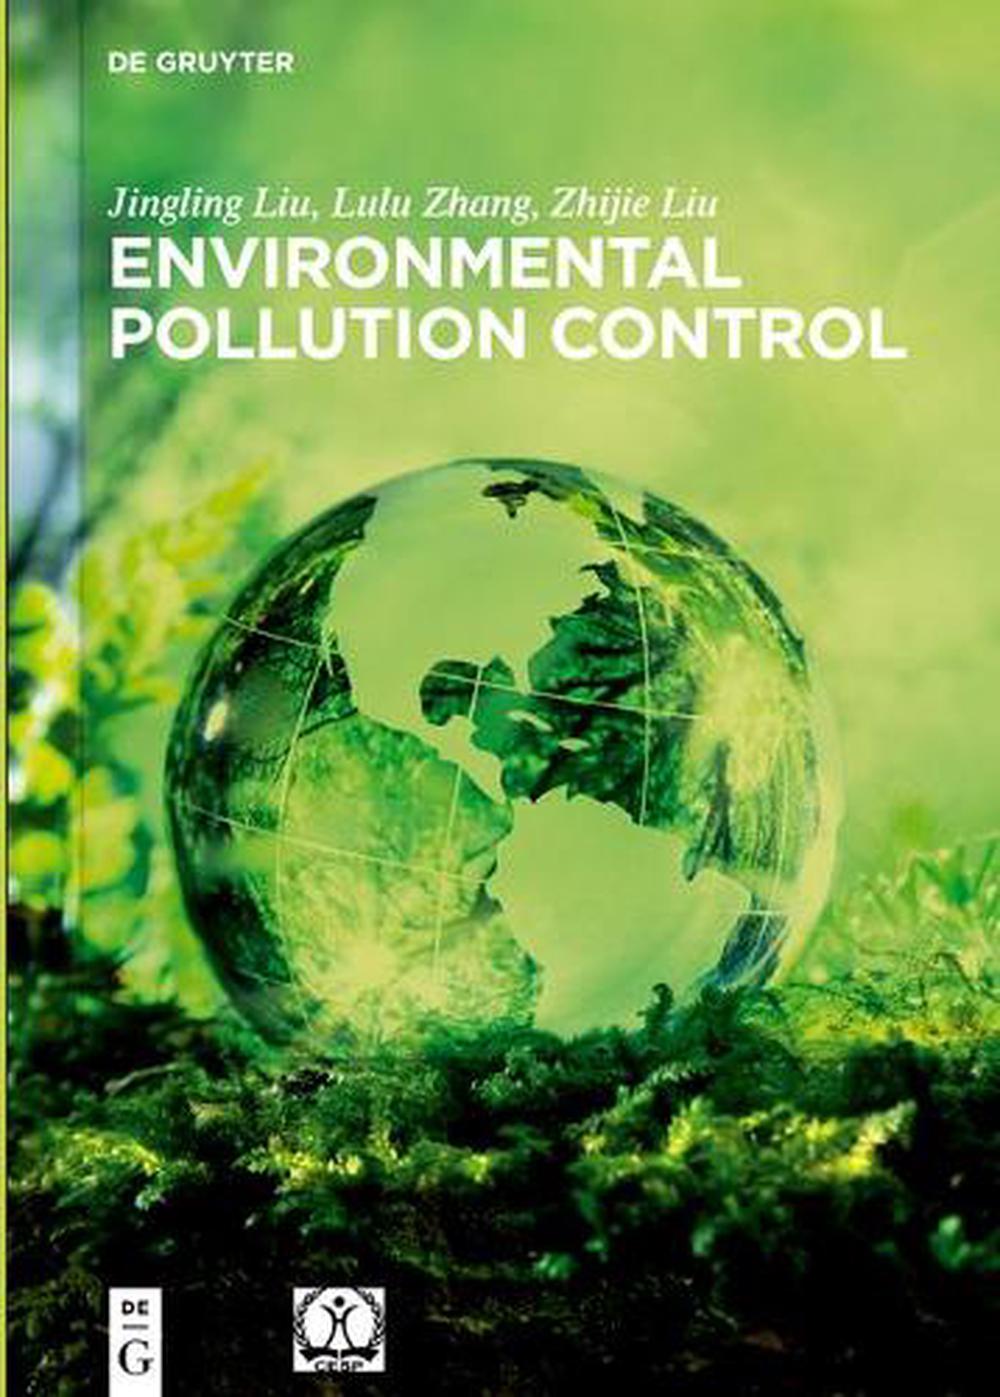 assignment on pollution control